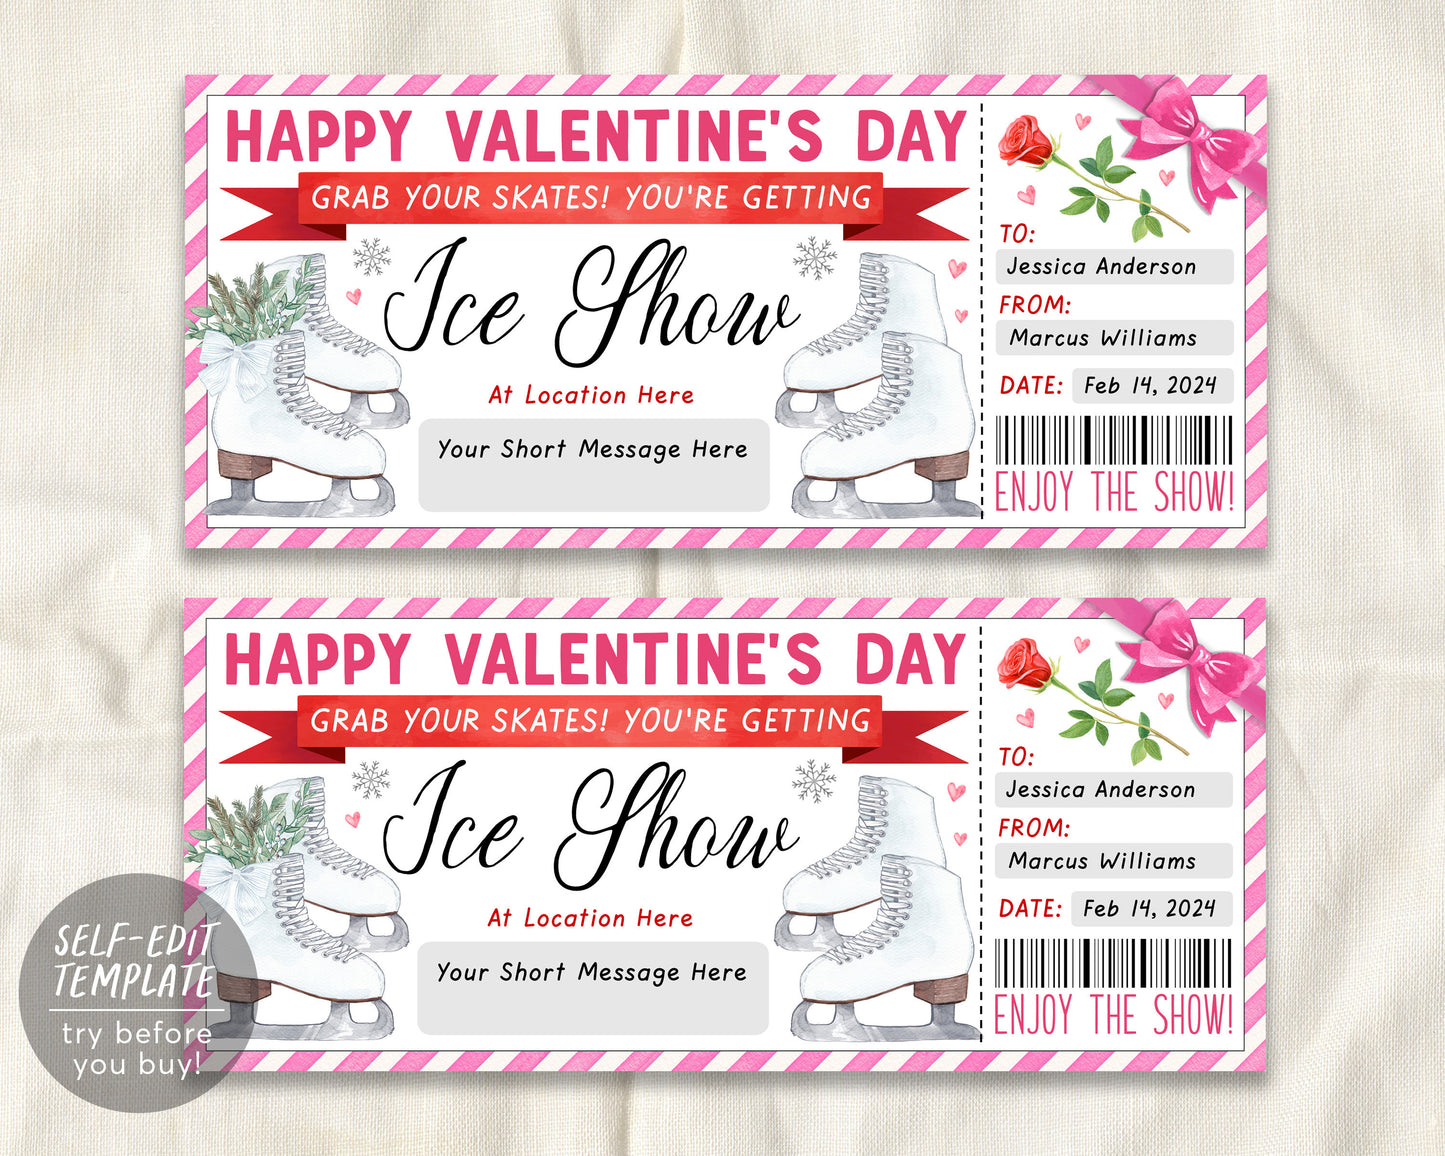 Valentines Day Ice Show Gift Voucher Editable Template